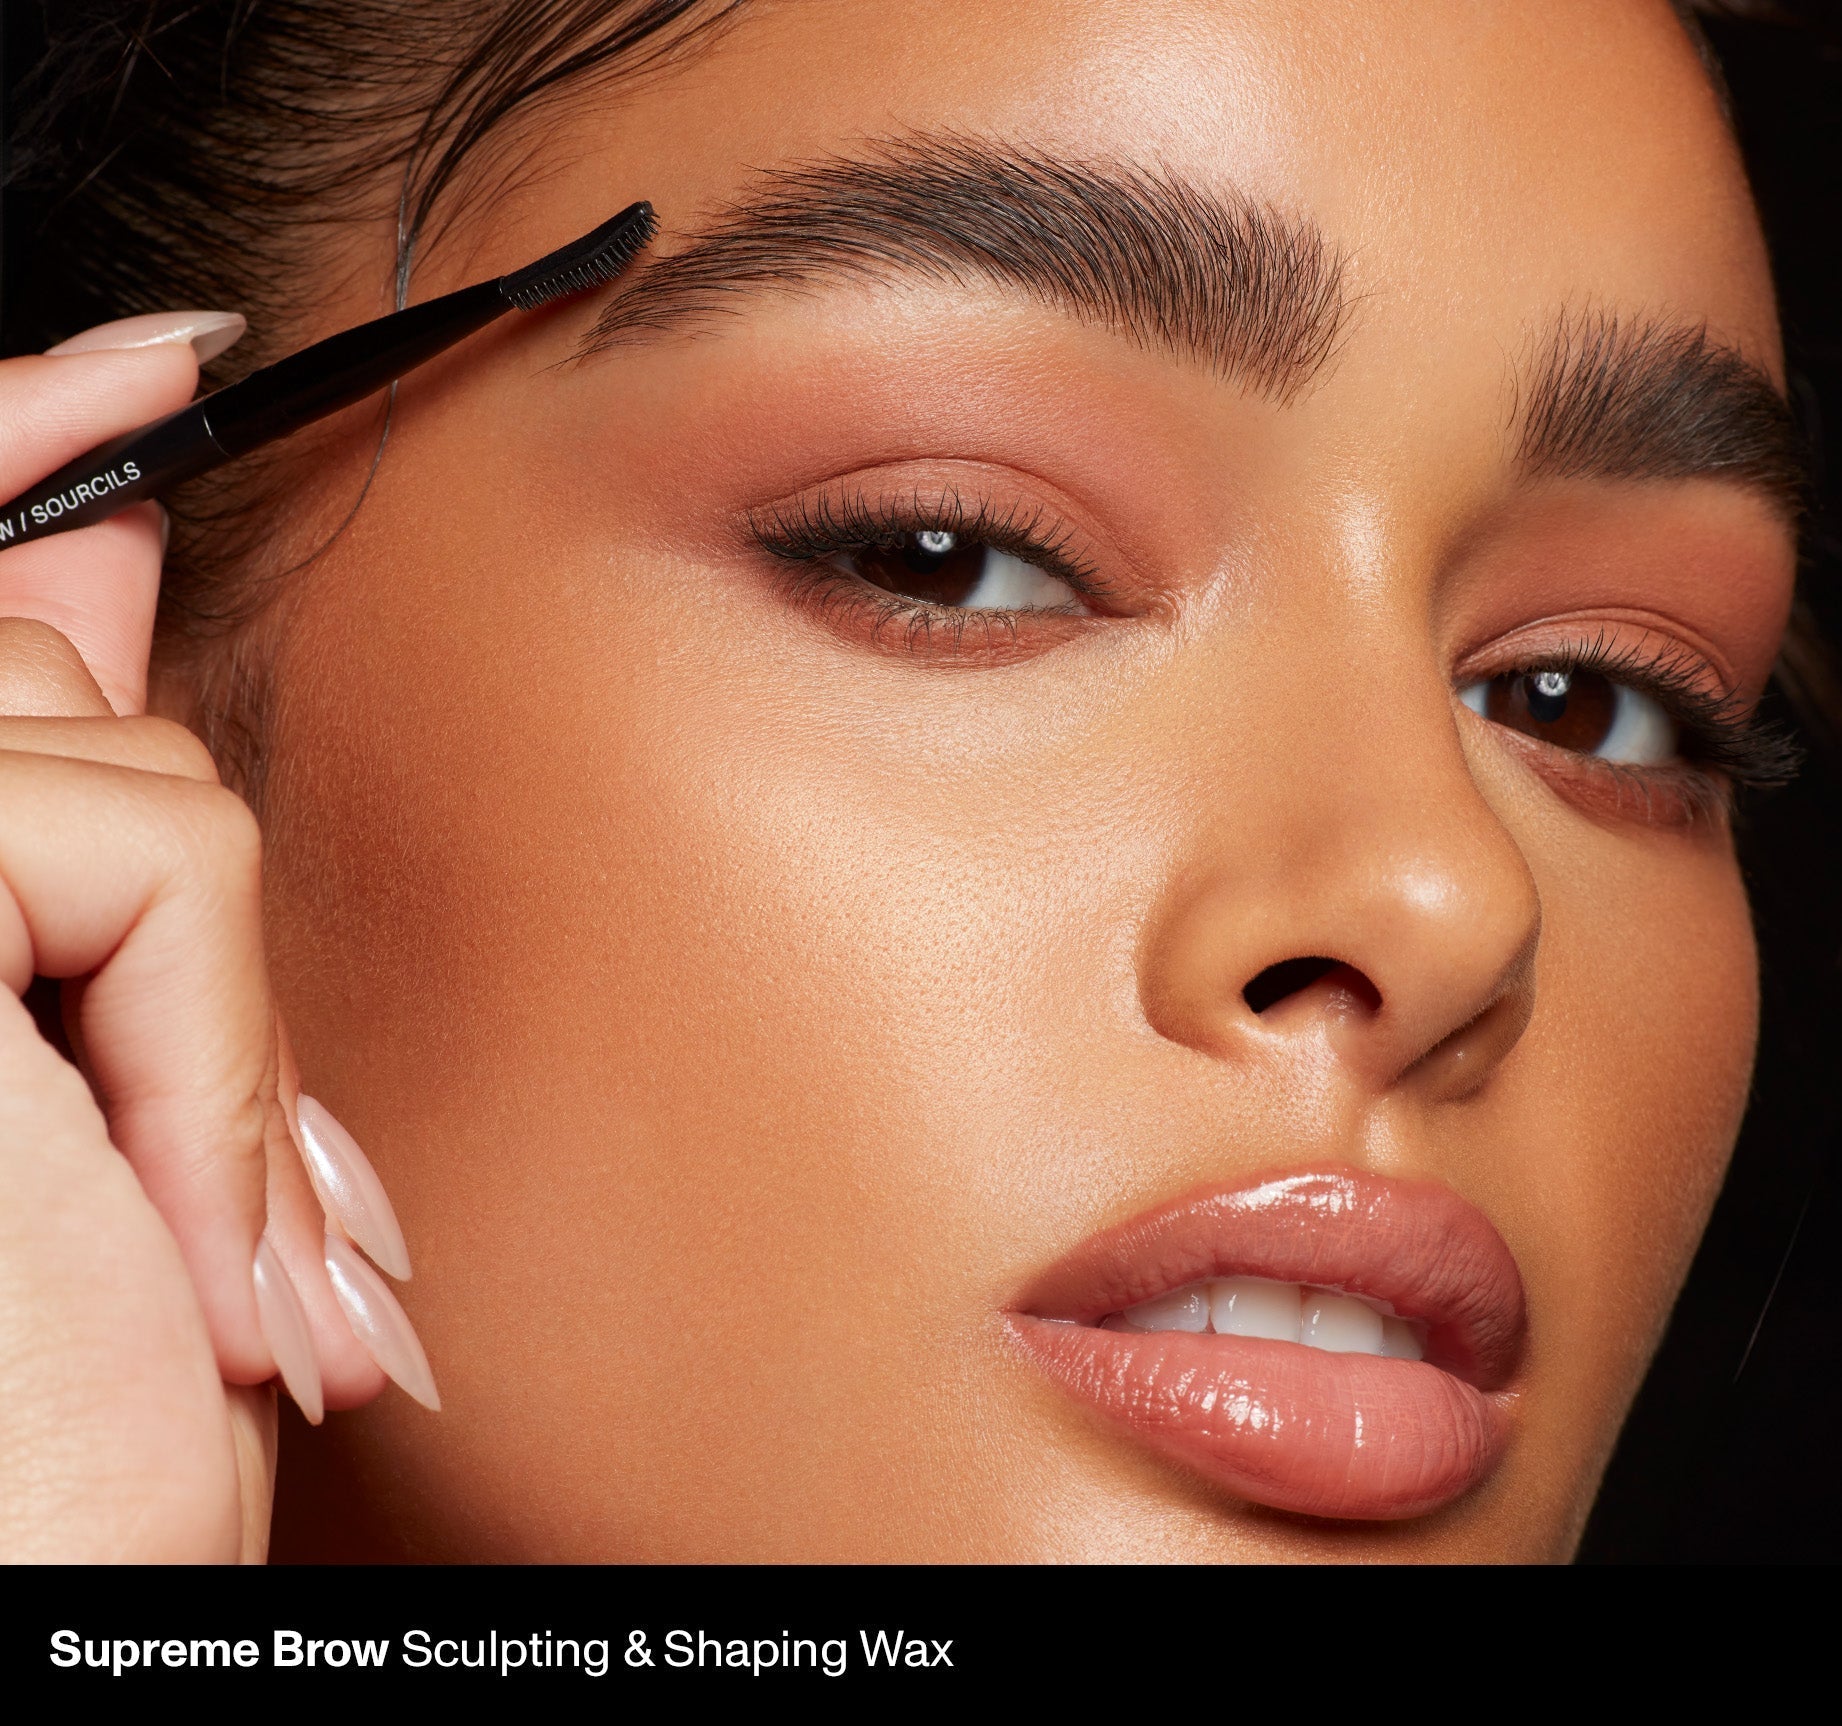 Supreme Brow Sculpting and Shaping Wax - Clear - Image 8